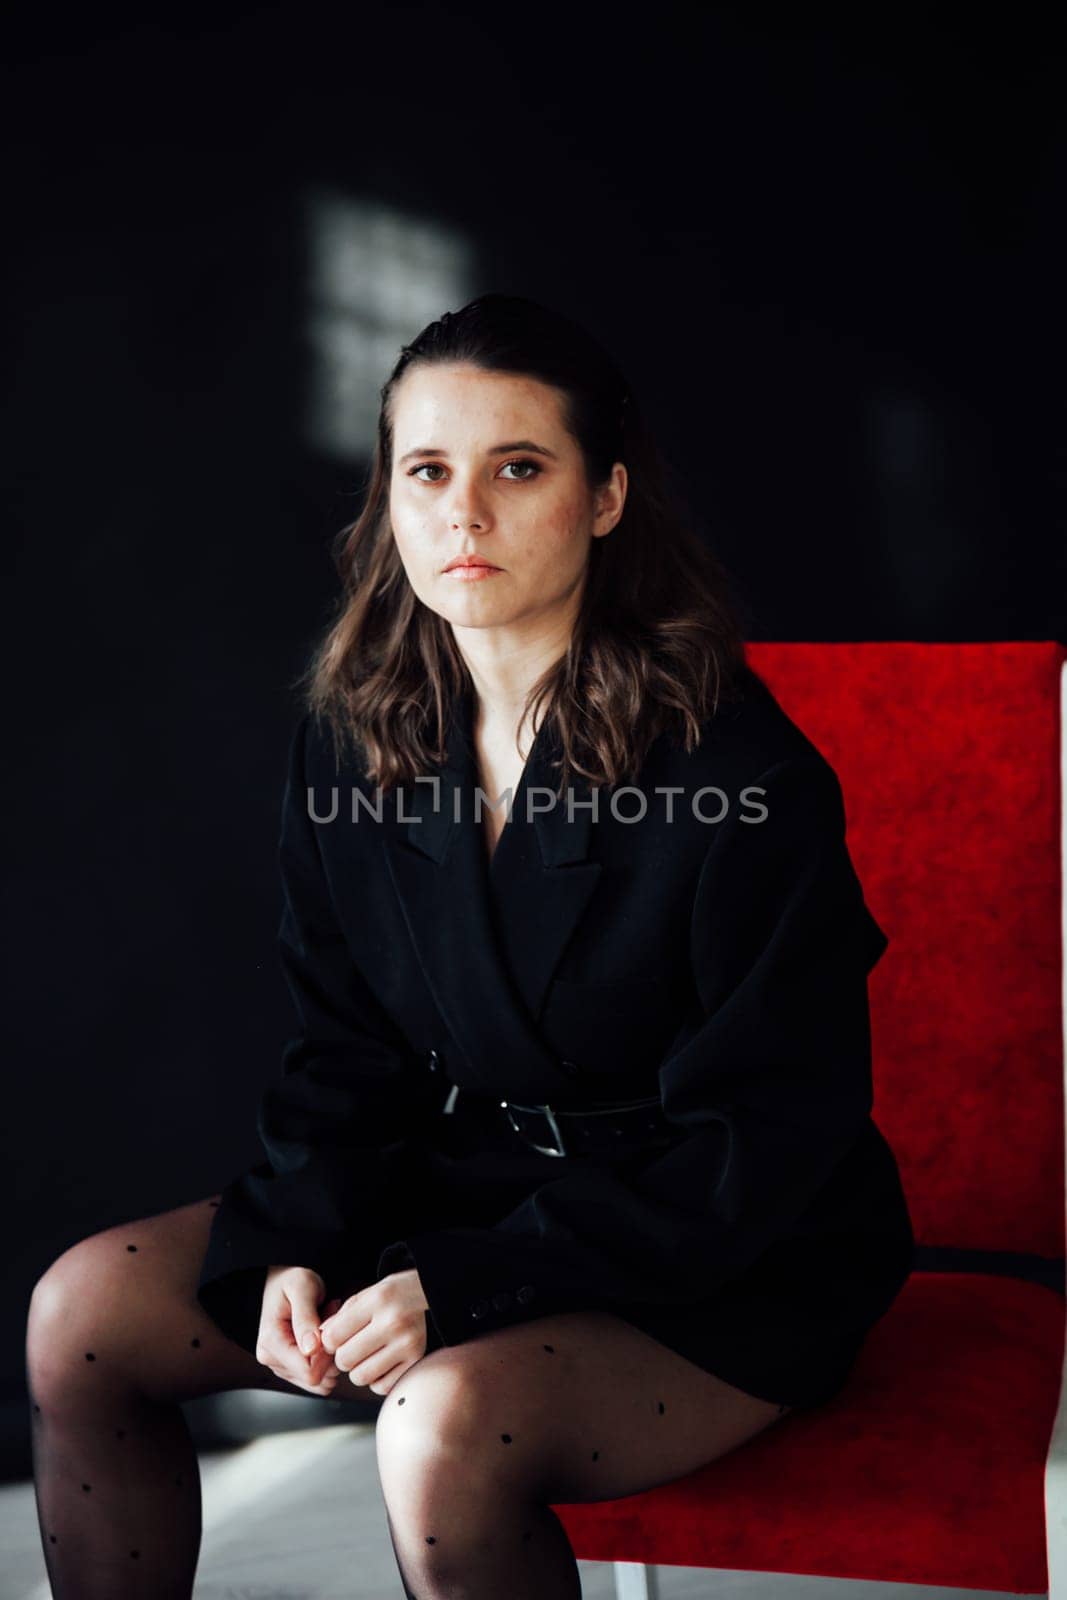 brunette woman posing on black background in studio on red chair